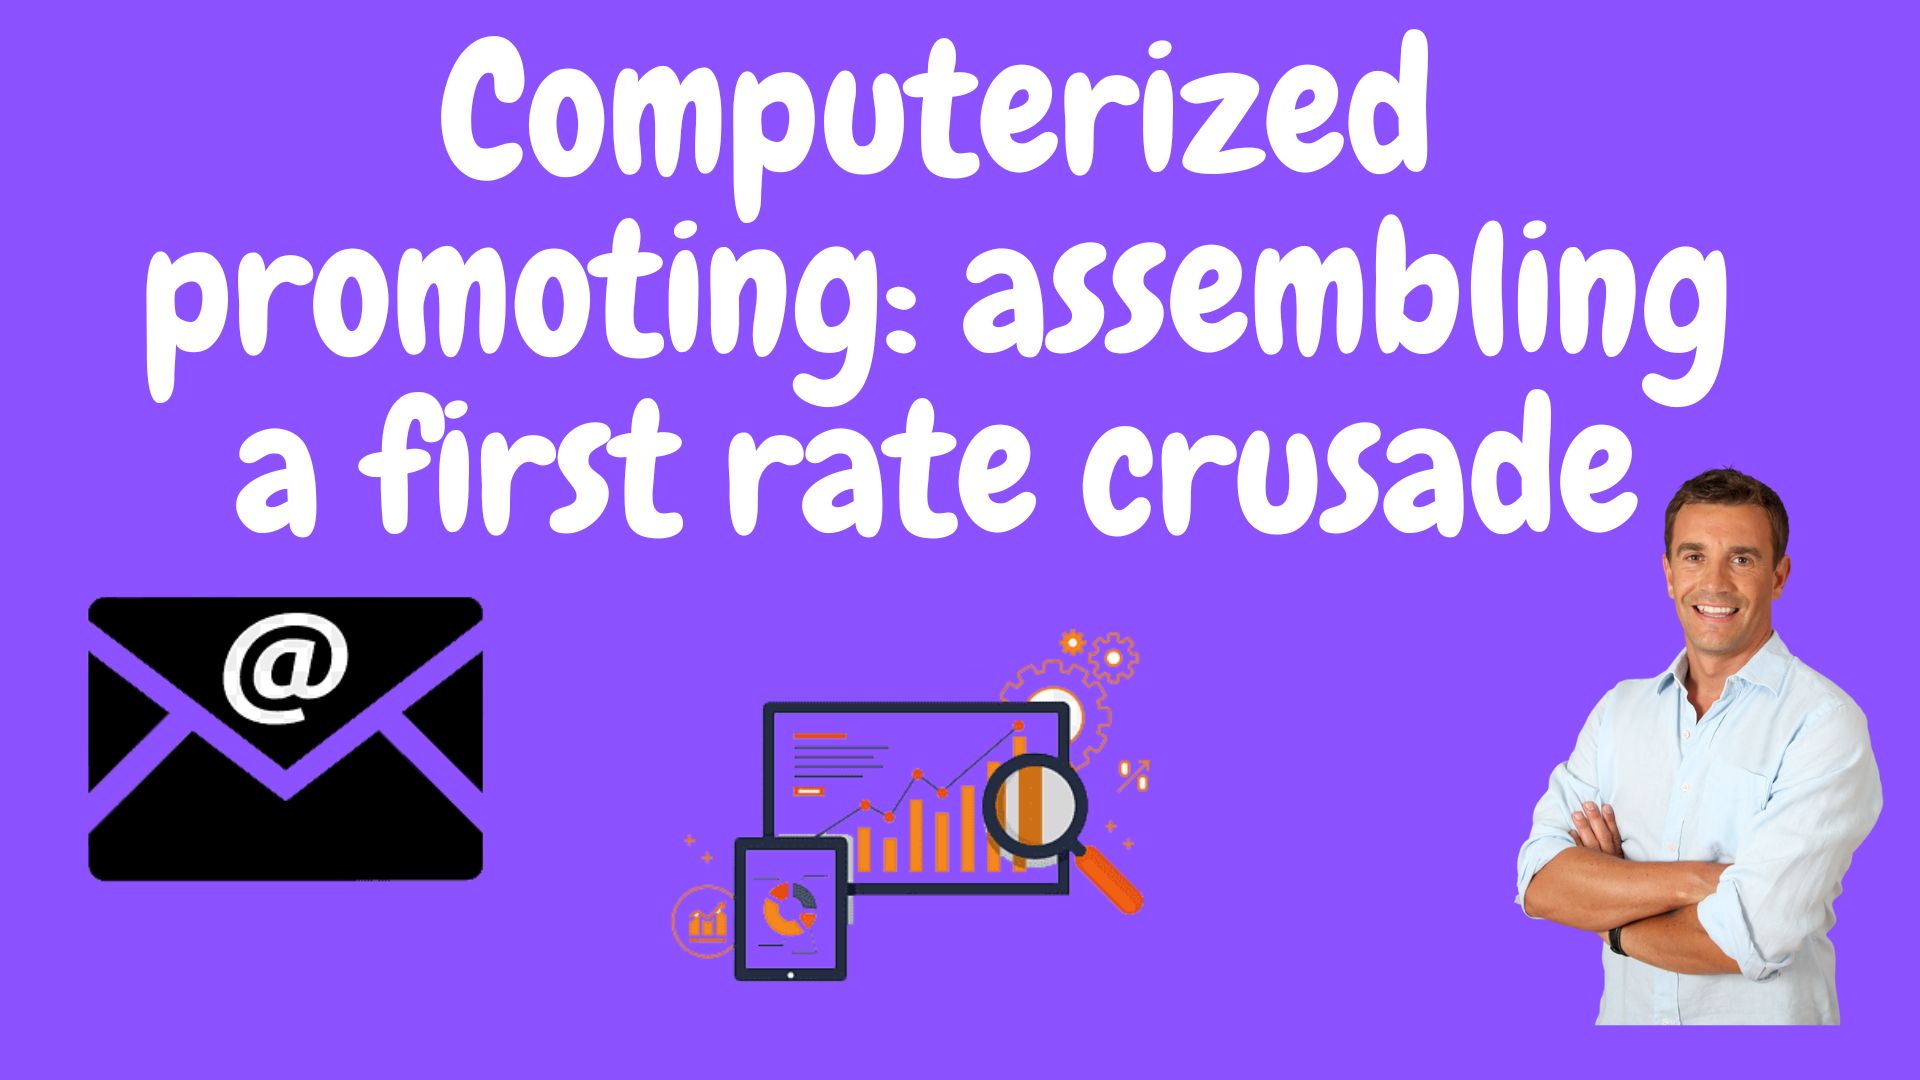 Computerized Promoting: Assembling A First Rate Crusade